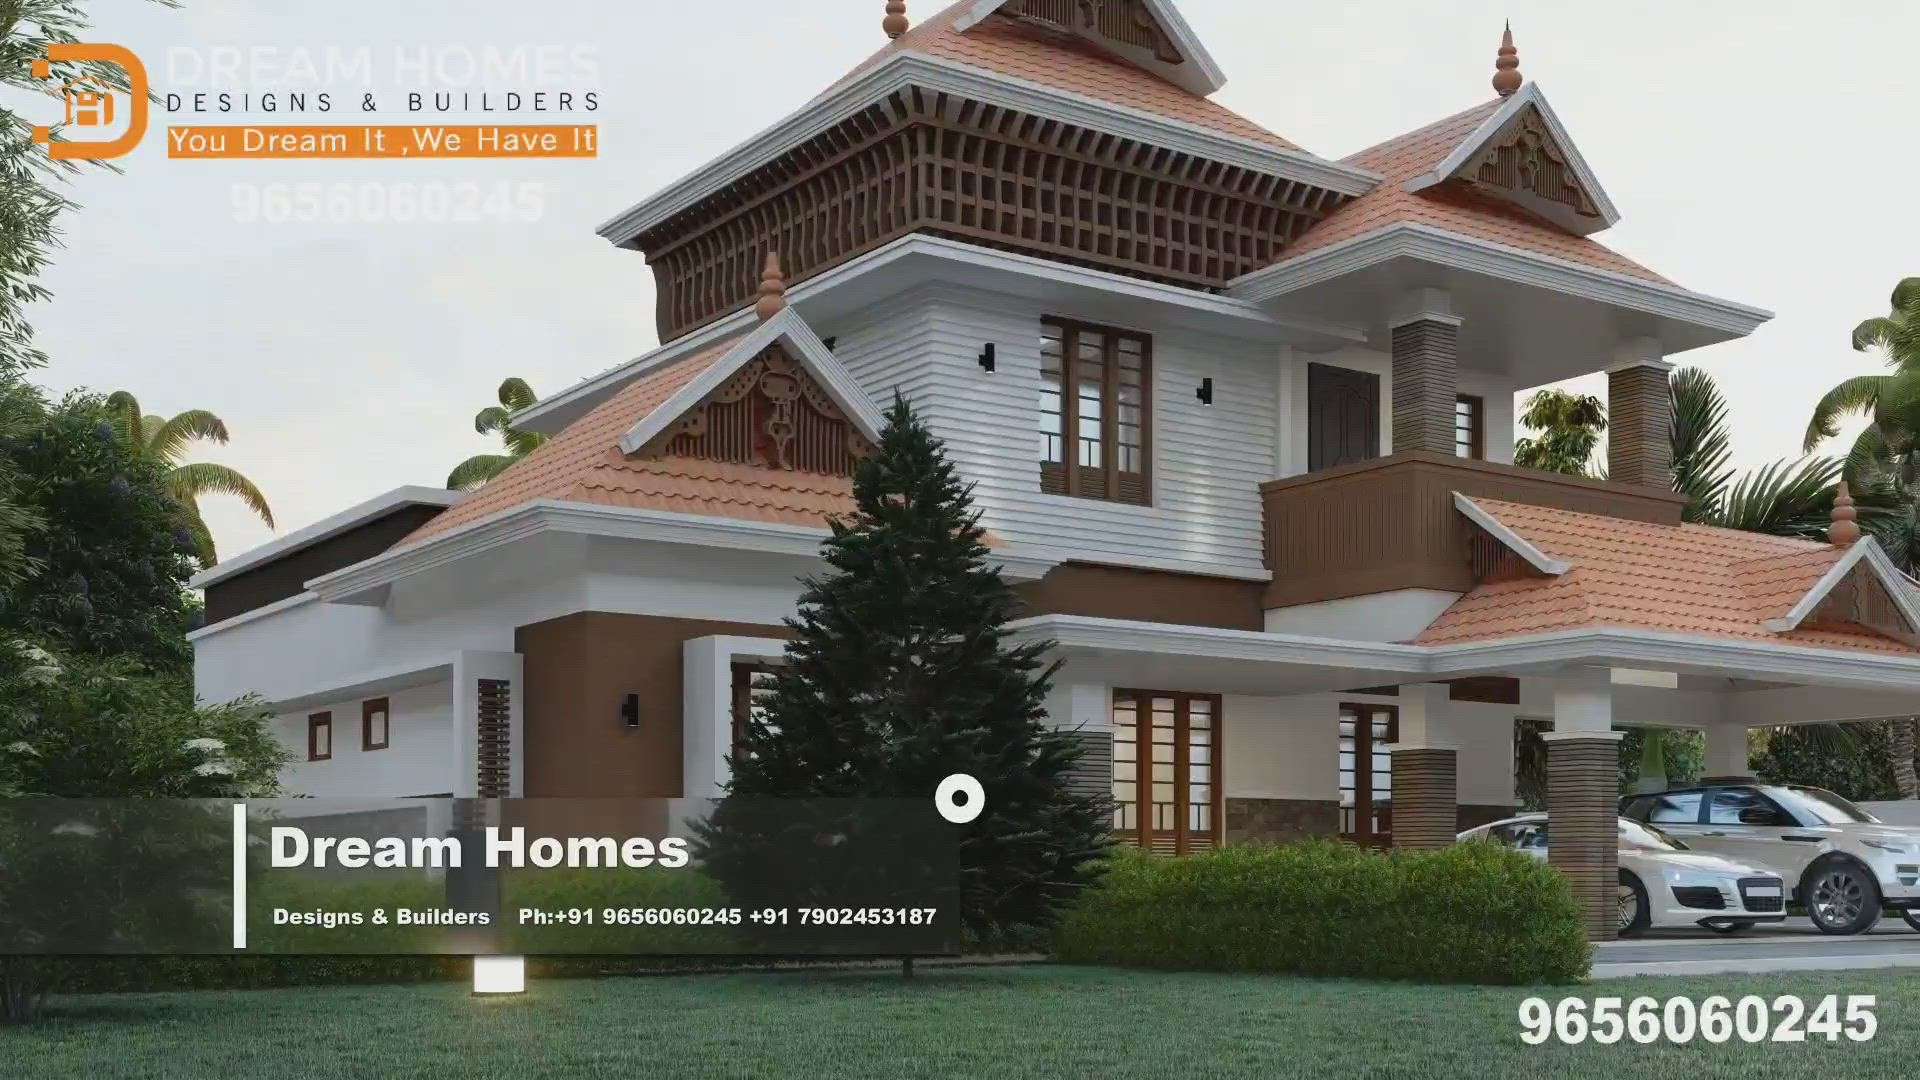 "DREAM HOMES DESIGNS & BUILDERS "
You Dream It, We Have It !
      MileStone for upcoming  succession of Dream Homes 
Please go through the musical session and enjoy the traditional vibe!

Spare yourself from the stress of construction, we assist you whenever needed. 
We have Customised Design Packages that Clients can choose what they need and require. 
We Offer :
=> House Construction & Renovation
=> Commercial Buildings, Apartments
=> Temple Construction in Geometry
=> Well Designed Vasthu Architecture
=>  Interior Designs 
=>  Loan Application 
=> Permits & Licenses 

We are providing service to all over India 
No Compromise on Quality, Sincerity & Efficiency.

For more info 
9656060245
7902453187